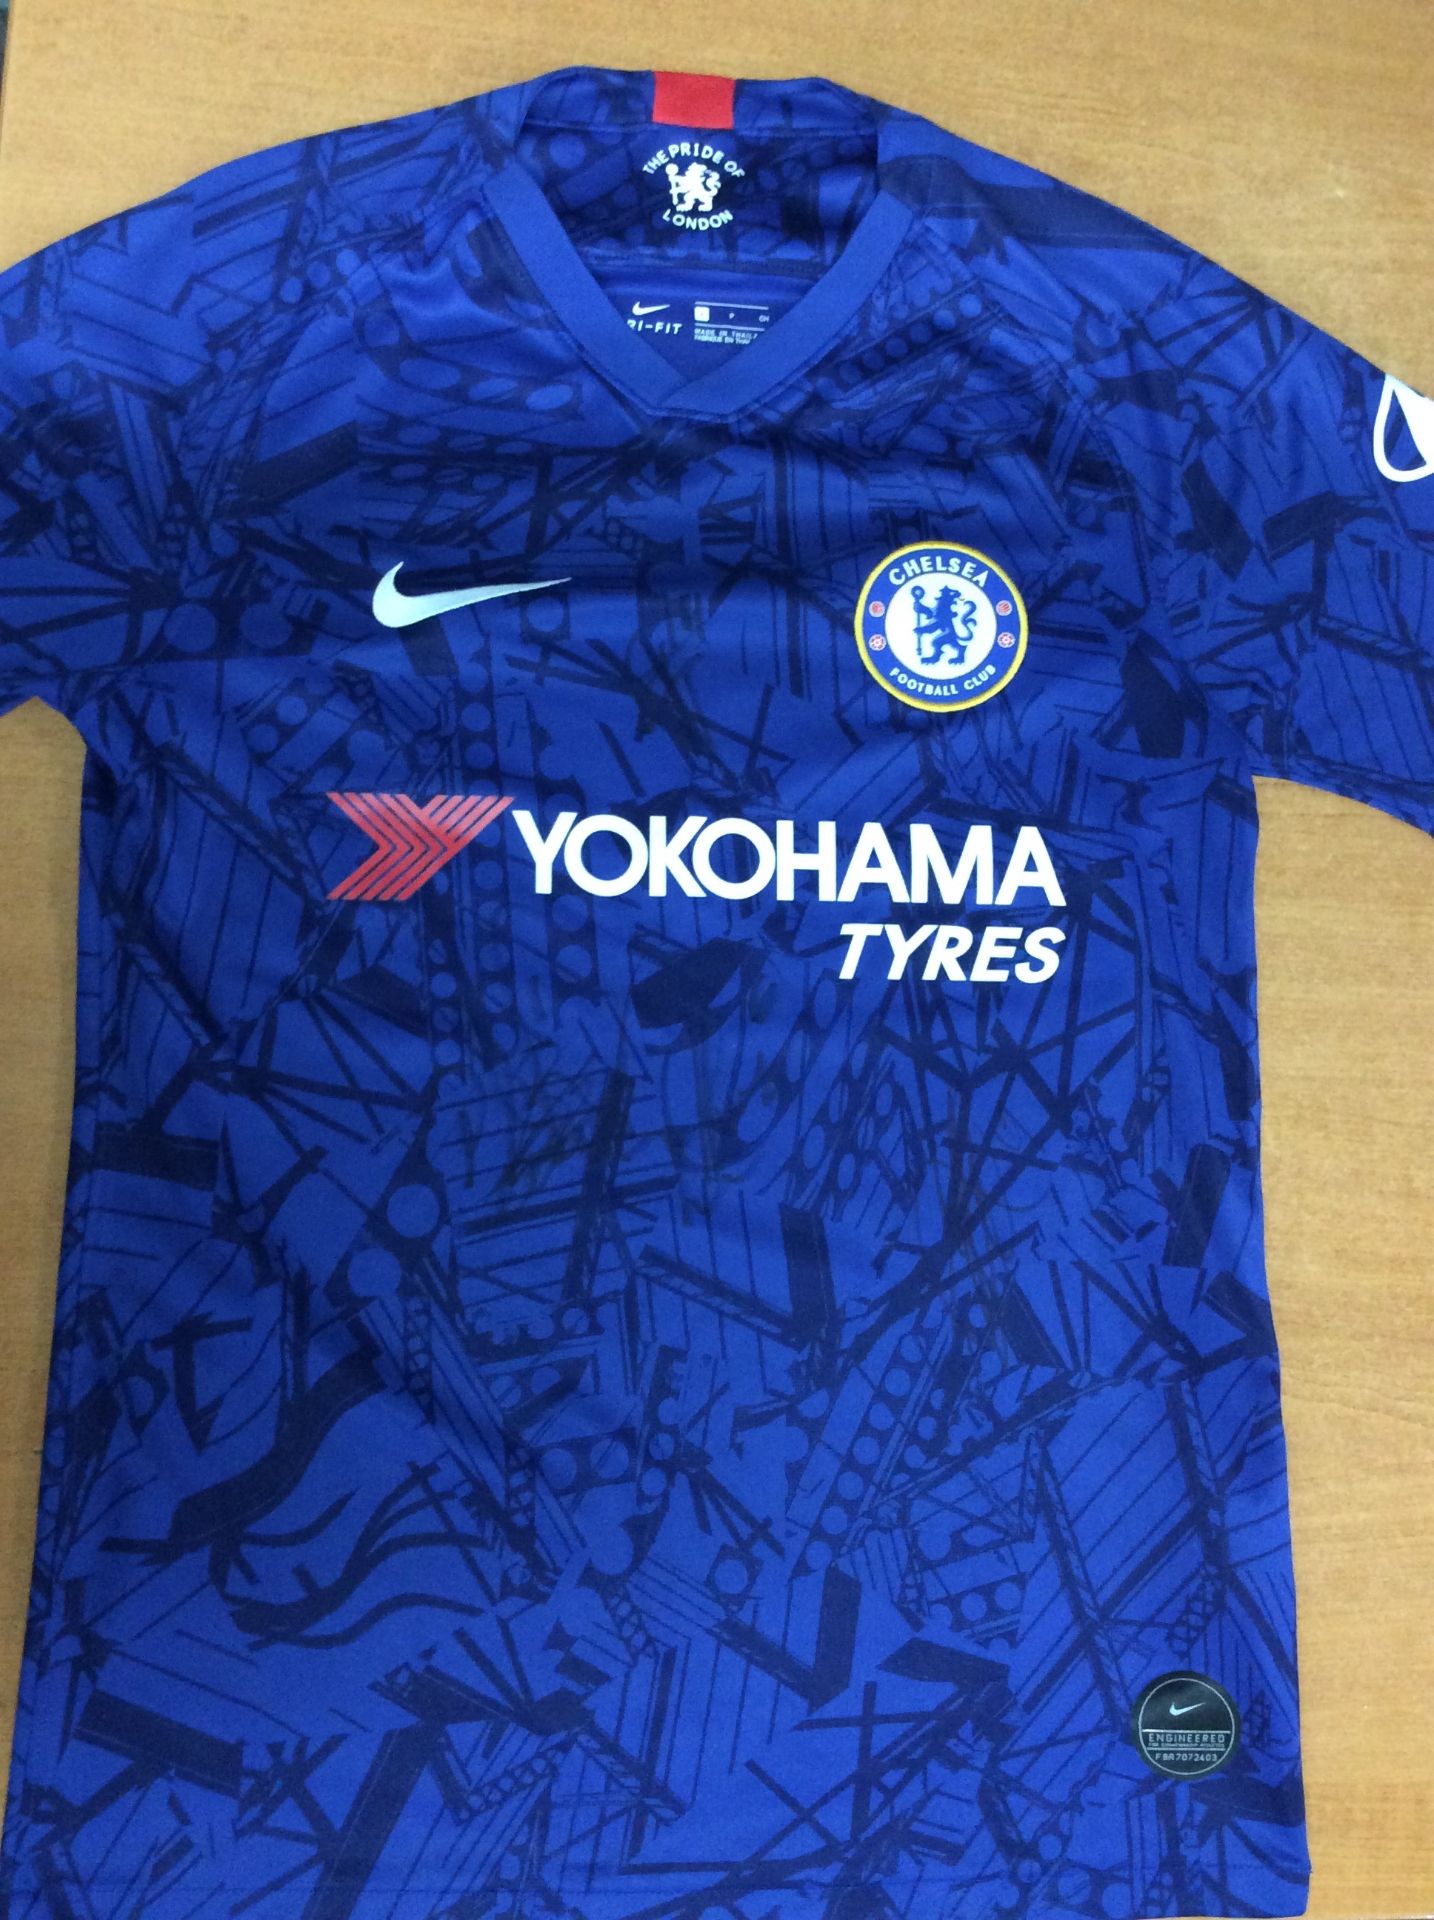 Chelsea Signed Football Shirt - Image 2 of 3